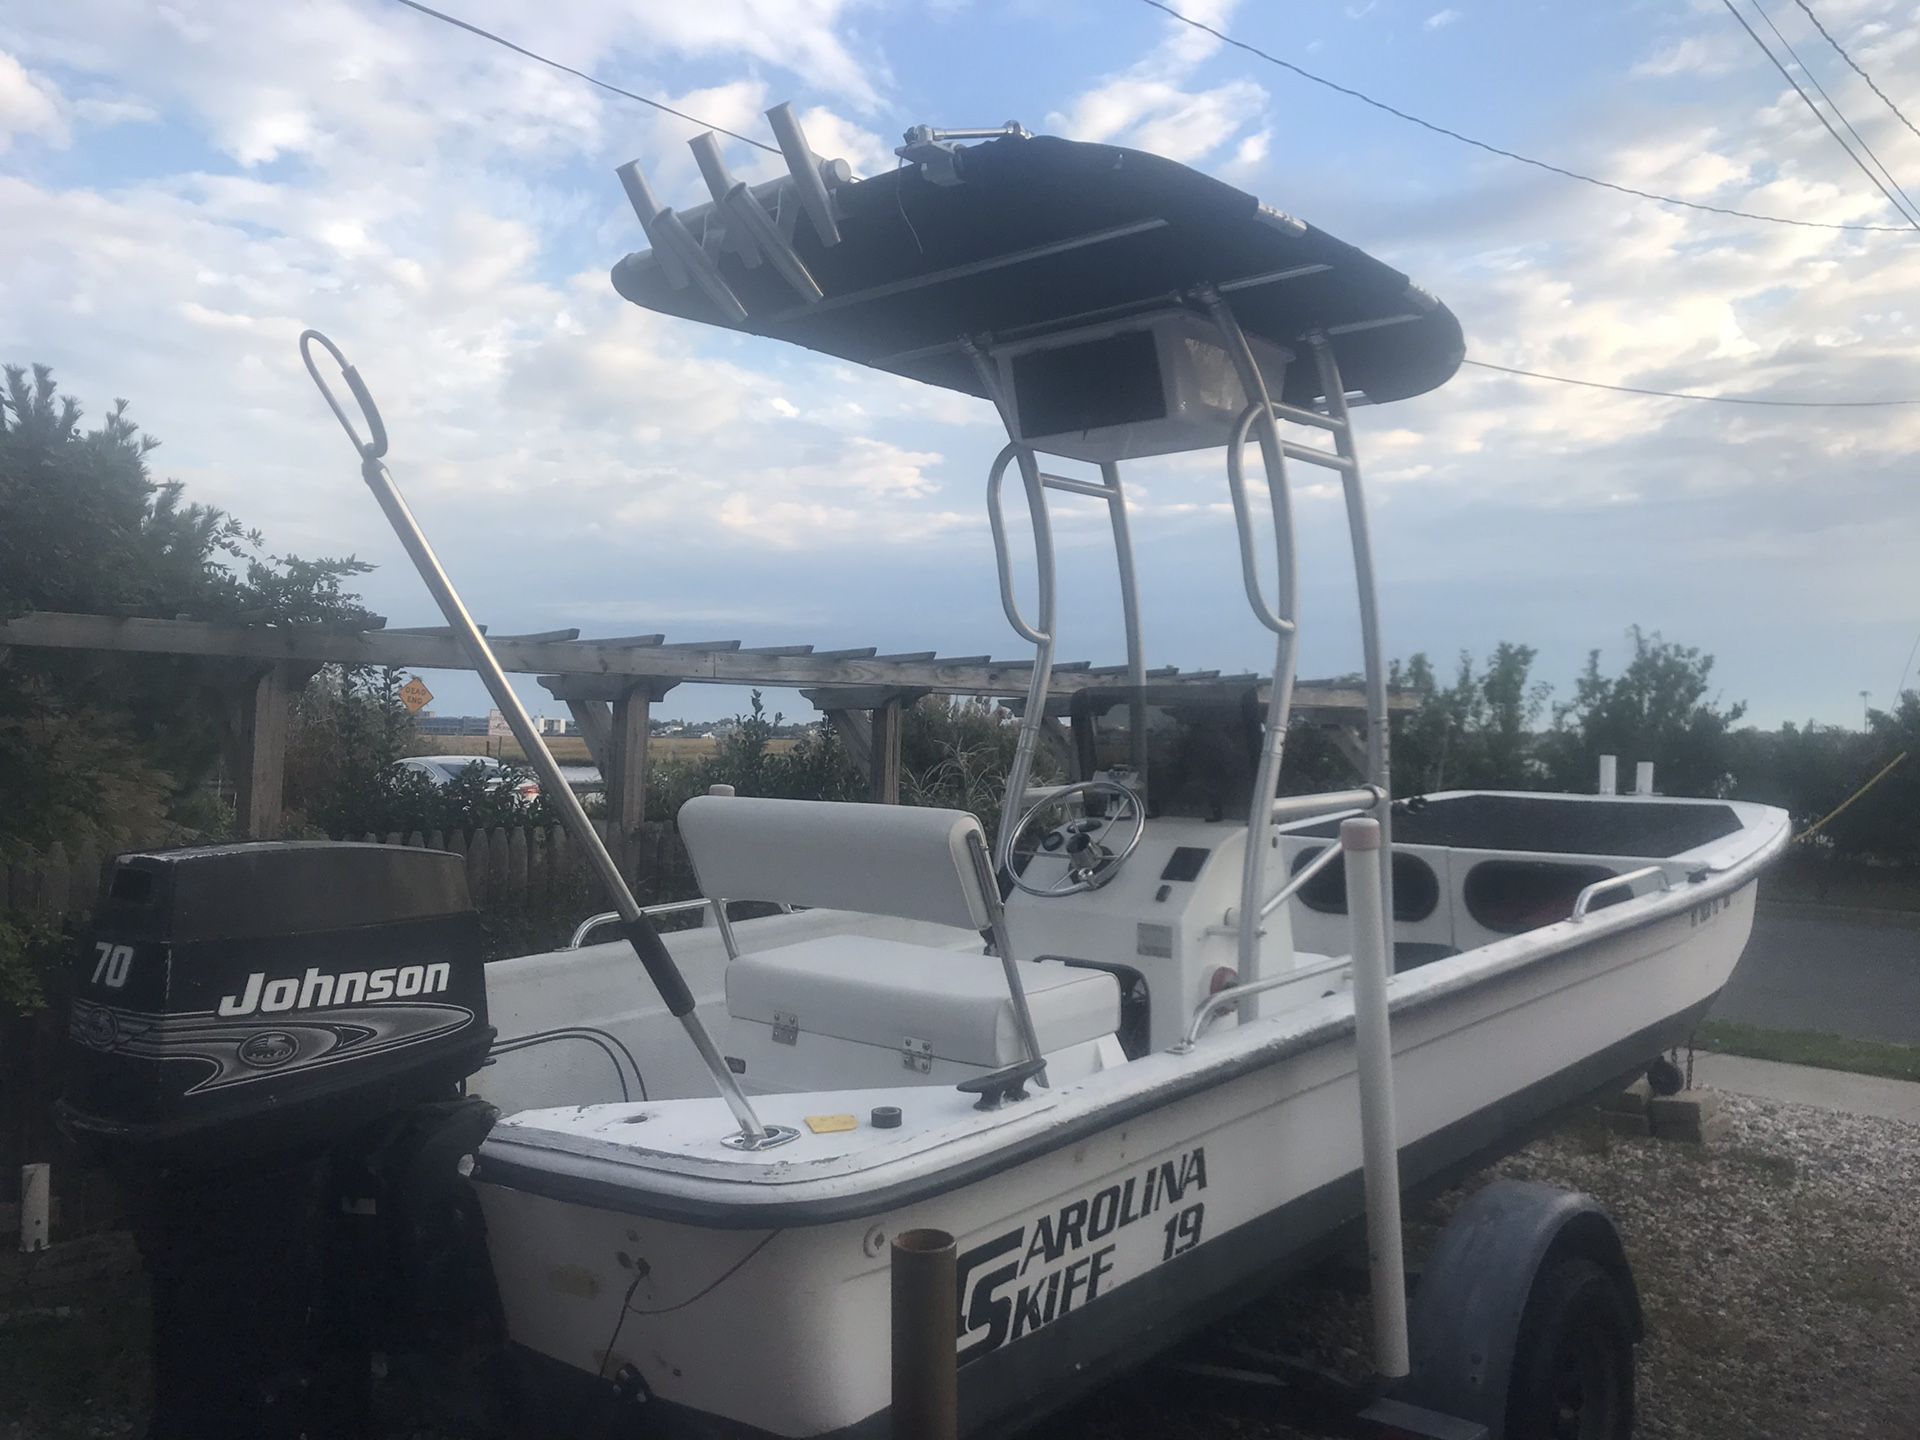 19ft Carolina skiff boat with 70hp outboard engine